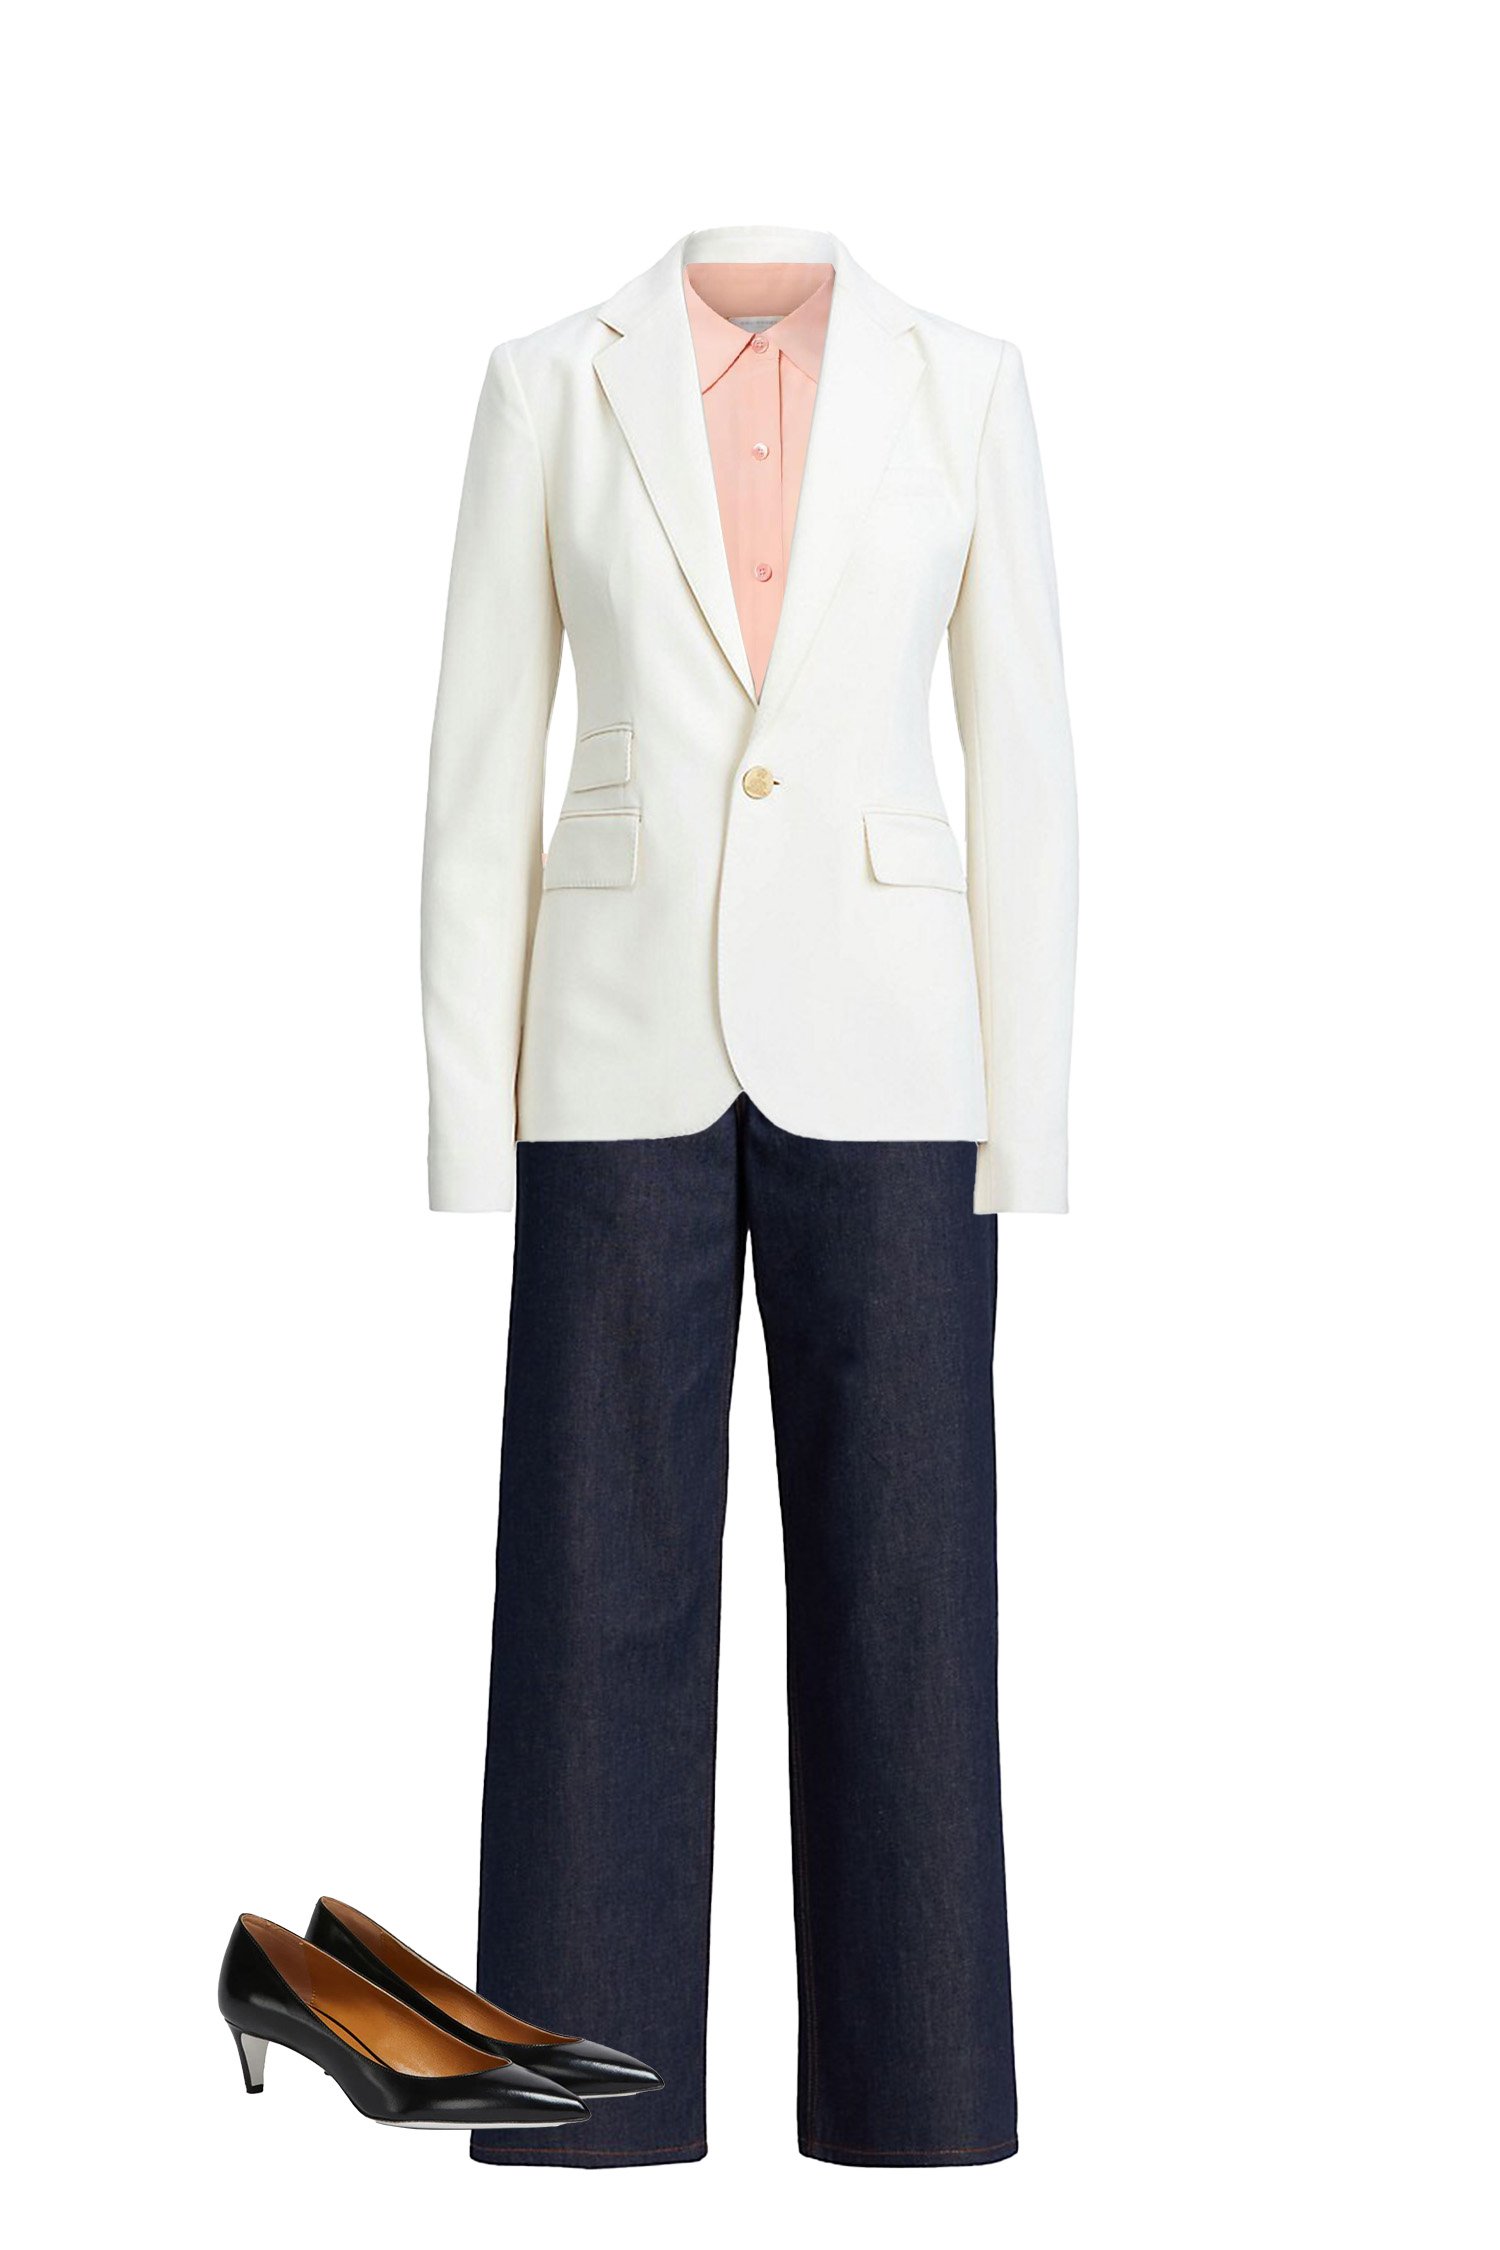 Dark Wash Baggy Jeans with Pink Silk Shirt and White Blazer